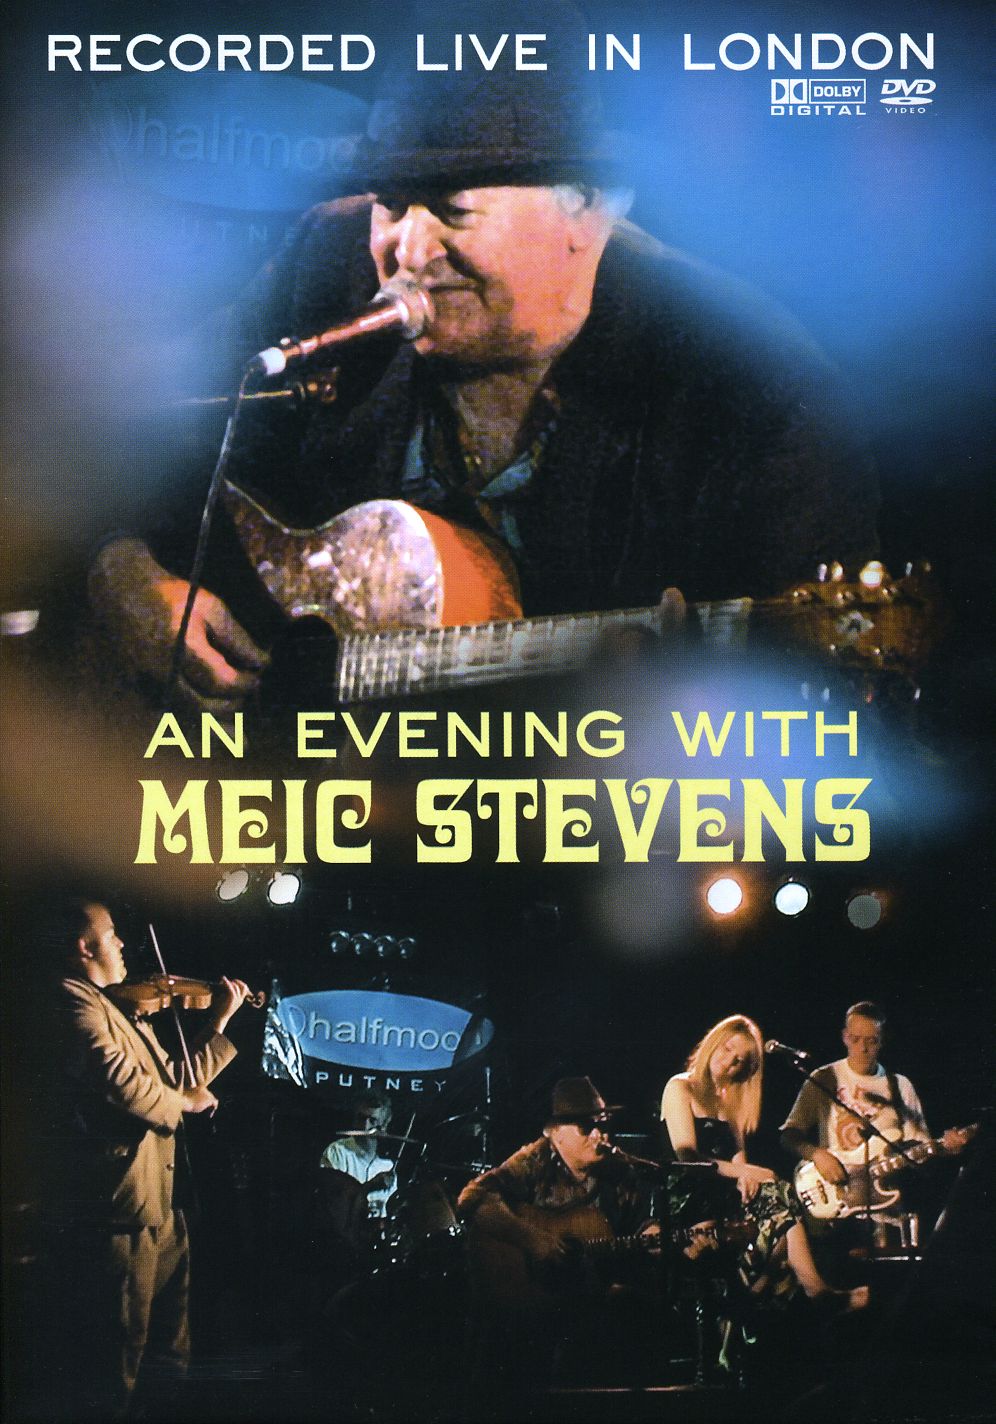 EVENING WITH MEIC STEVENS